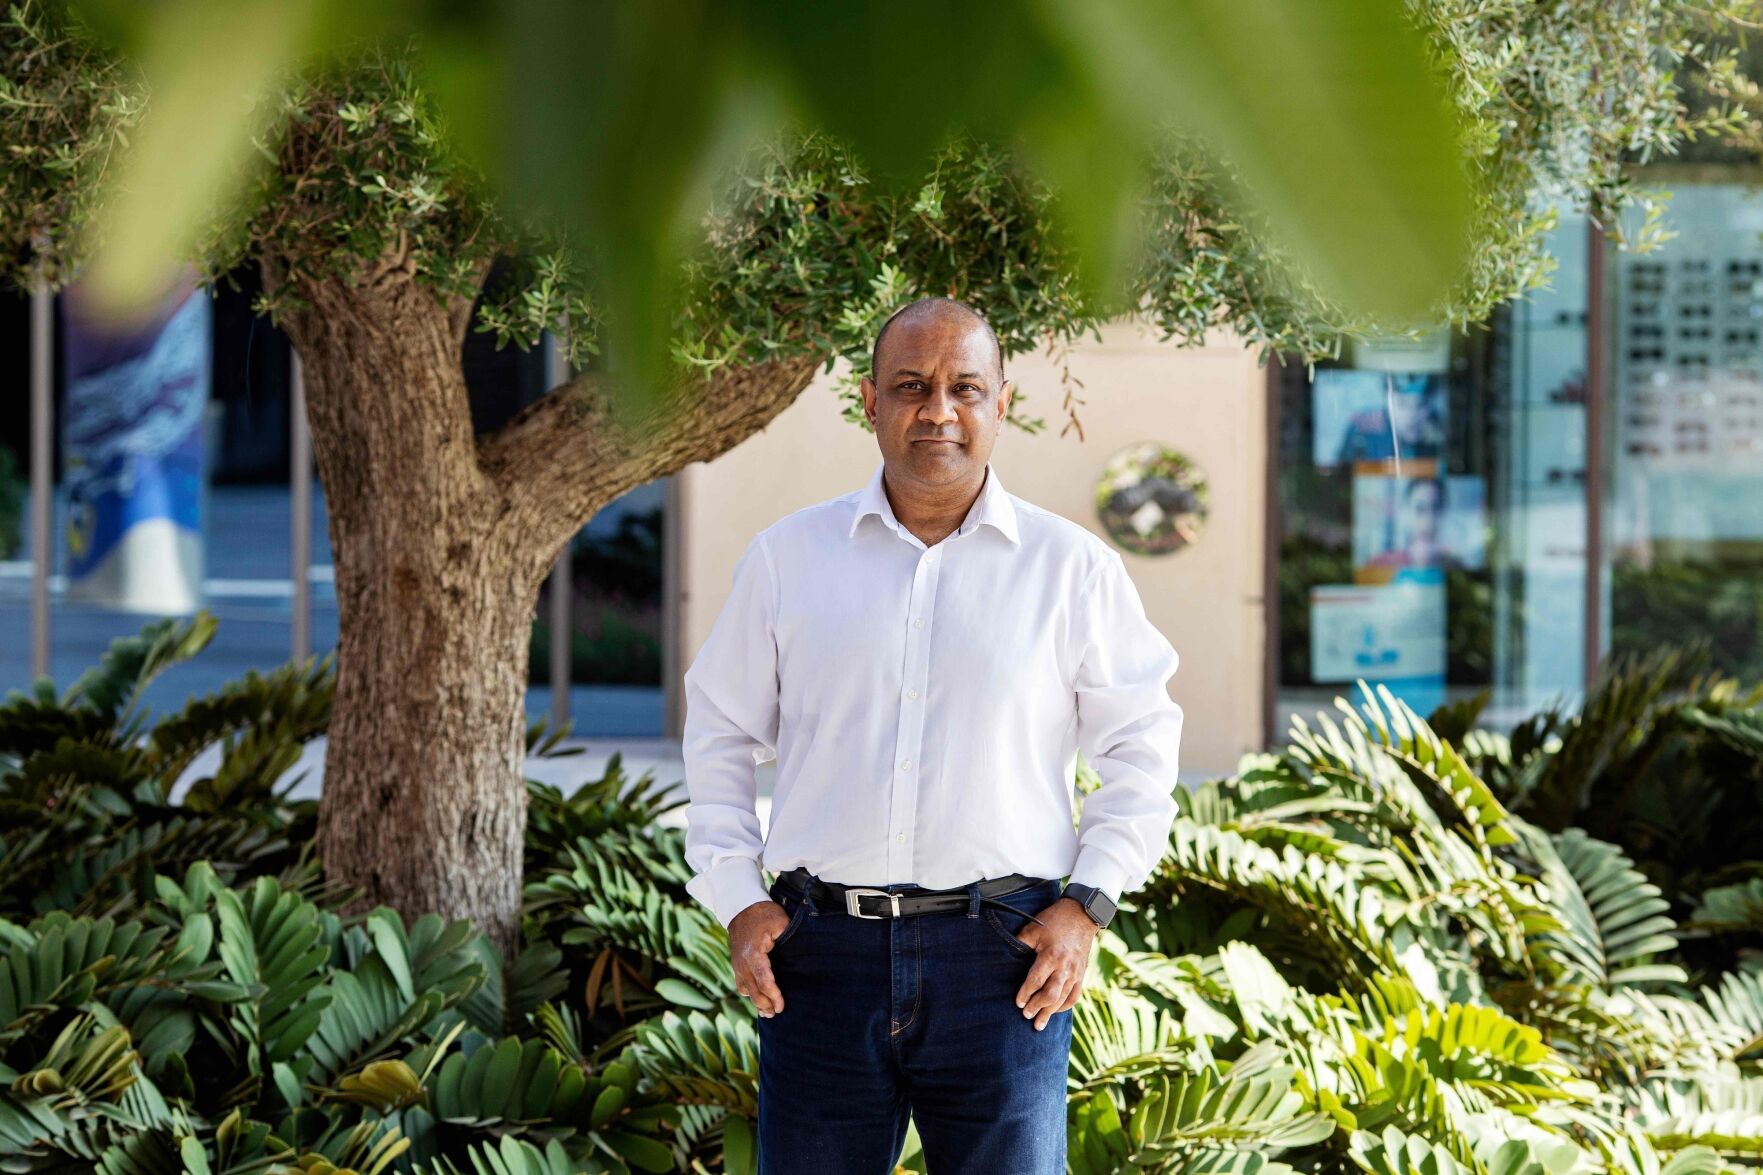 <p>FILE - Sanjay Shah poses for a photograph on the Palm Jumeriah Island in Dubai, United Arab Emirates, on Sept. 29, 2020. A Dubai-based British hedge fund trader sought by Danish authorities for orchestrating a $1.7 billion tax fraud, considered one of the largest tax frauds in the Scandinavian country, has been extradited from the United Arab Emirates to Denmark where he faces prosecution, officials said Wednesday Dec. 6, 2023. (AP Photo/Christopher Pike, File)</p>   PHOTO CREDIT: Christopher Pike